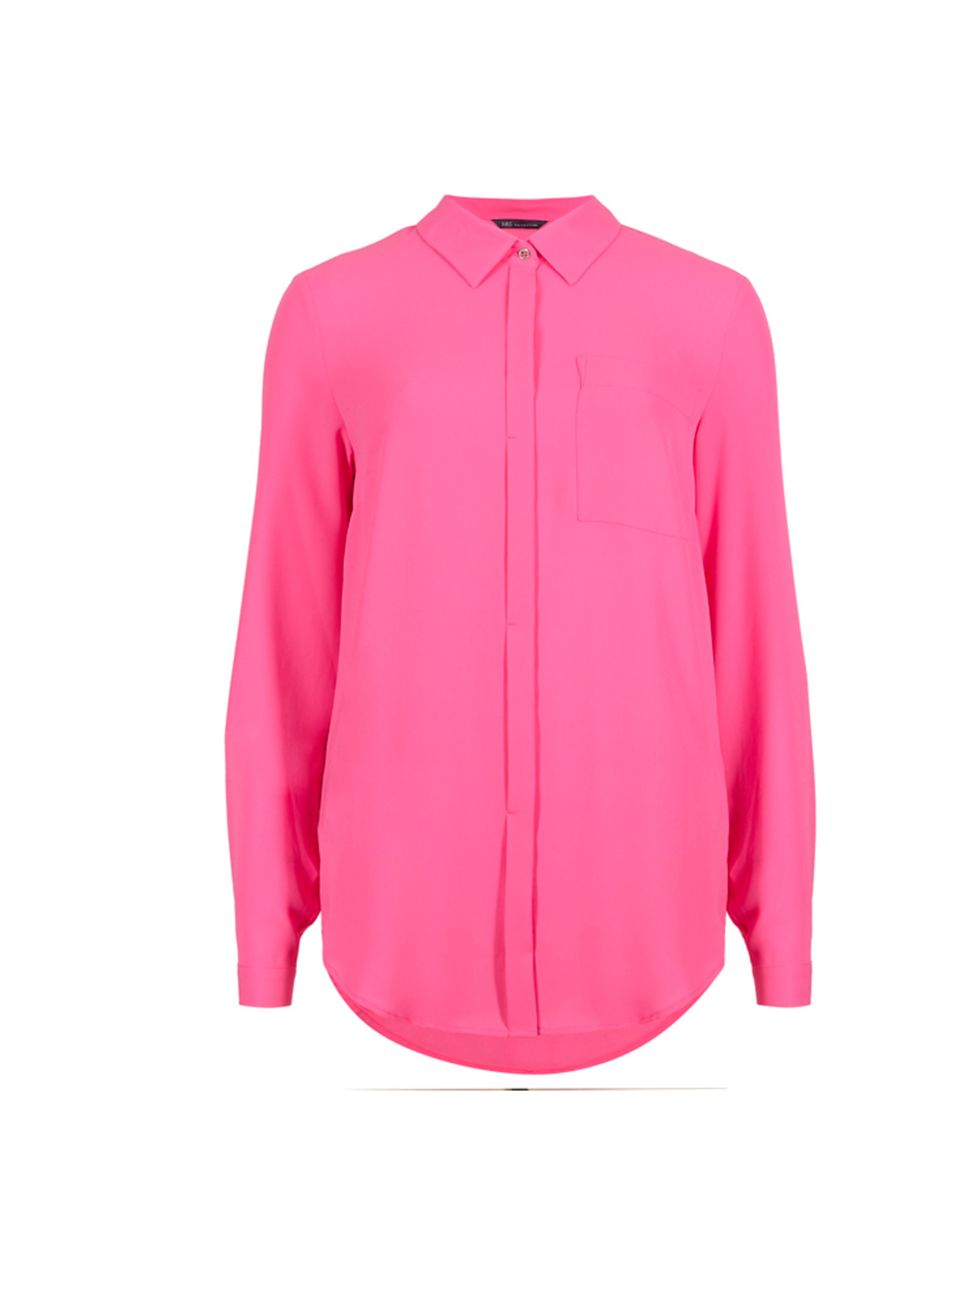 <p><a href="http://www.marksandspencer.com/no-peep-collared-neck-long-sleeve-blouse/p/p22355527?colour=PinkFizz#" target="_blank">Marks and Spencer</a> shirt, £28</p>